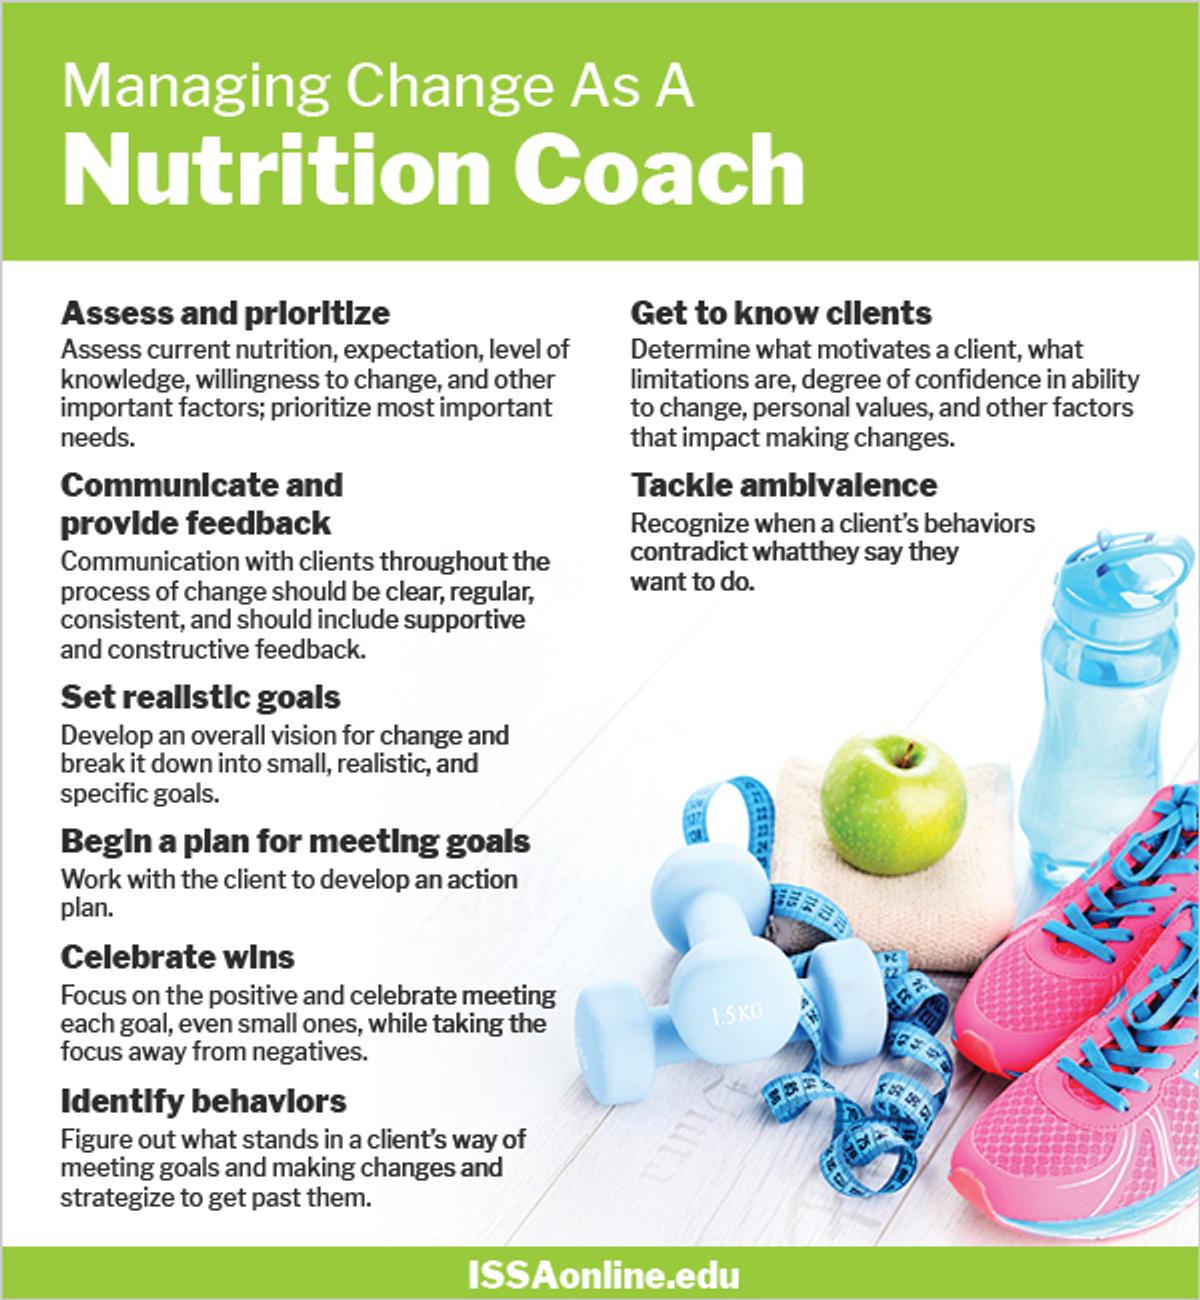 Managing Change as a Nutrition Coach